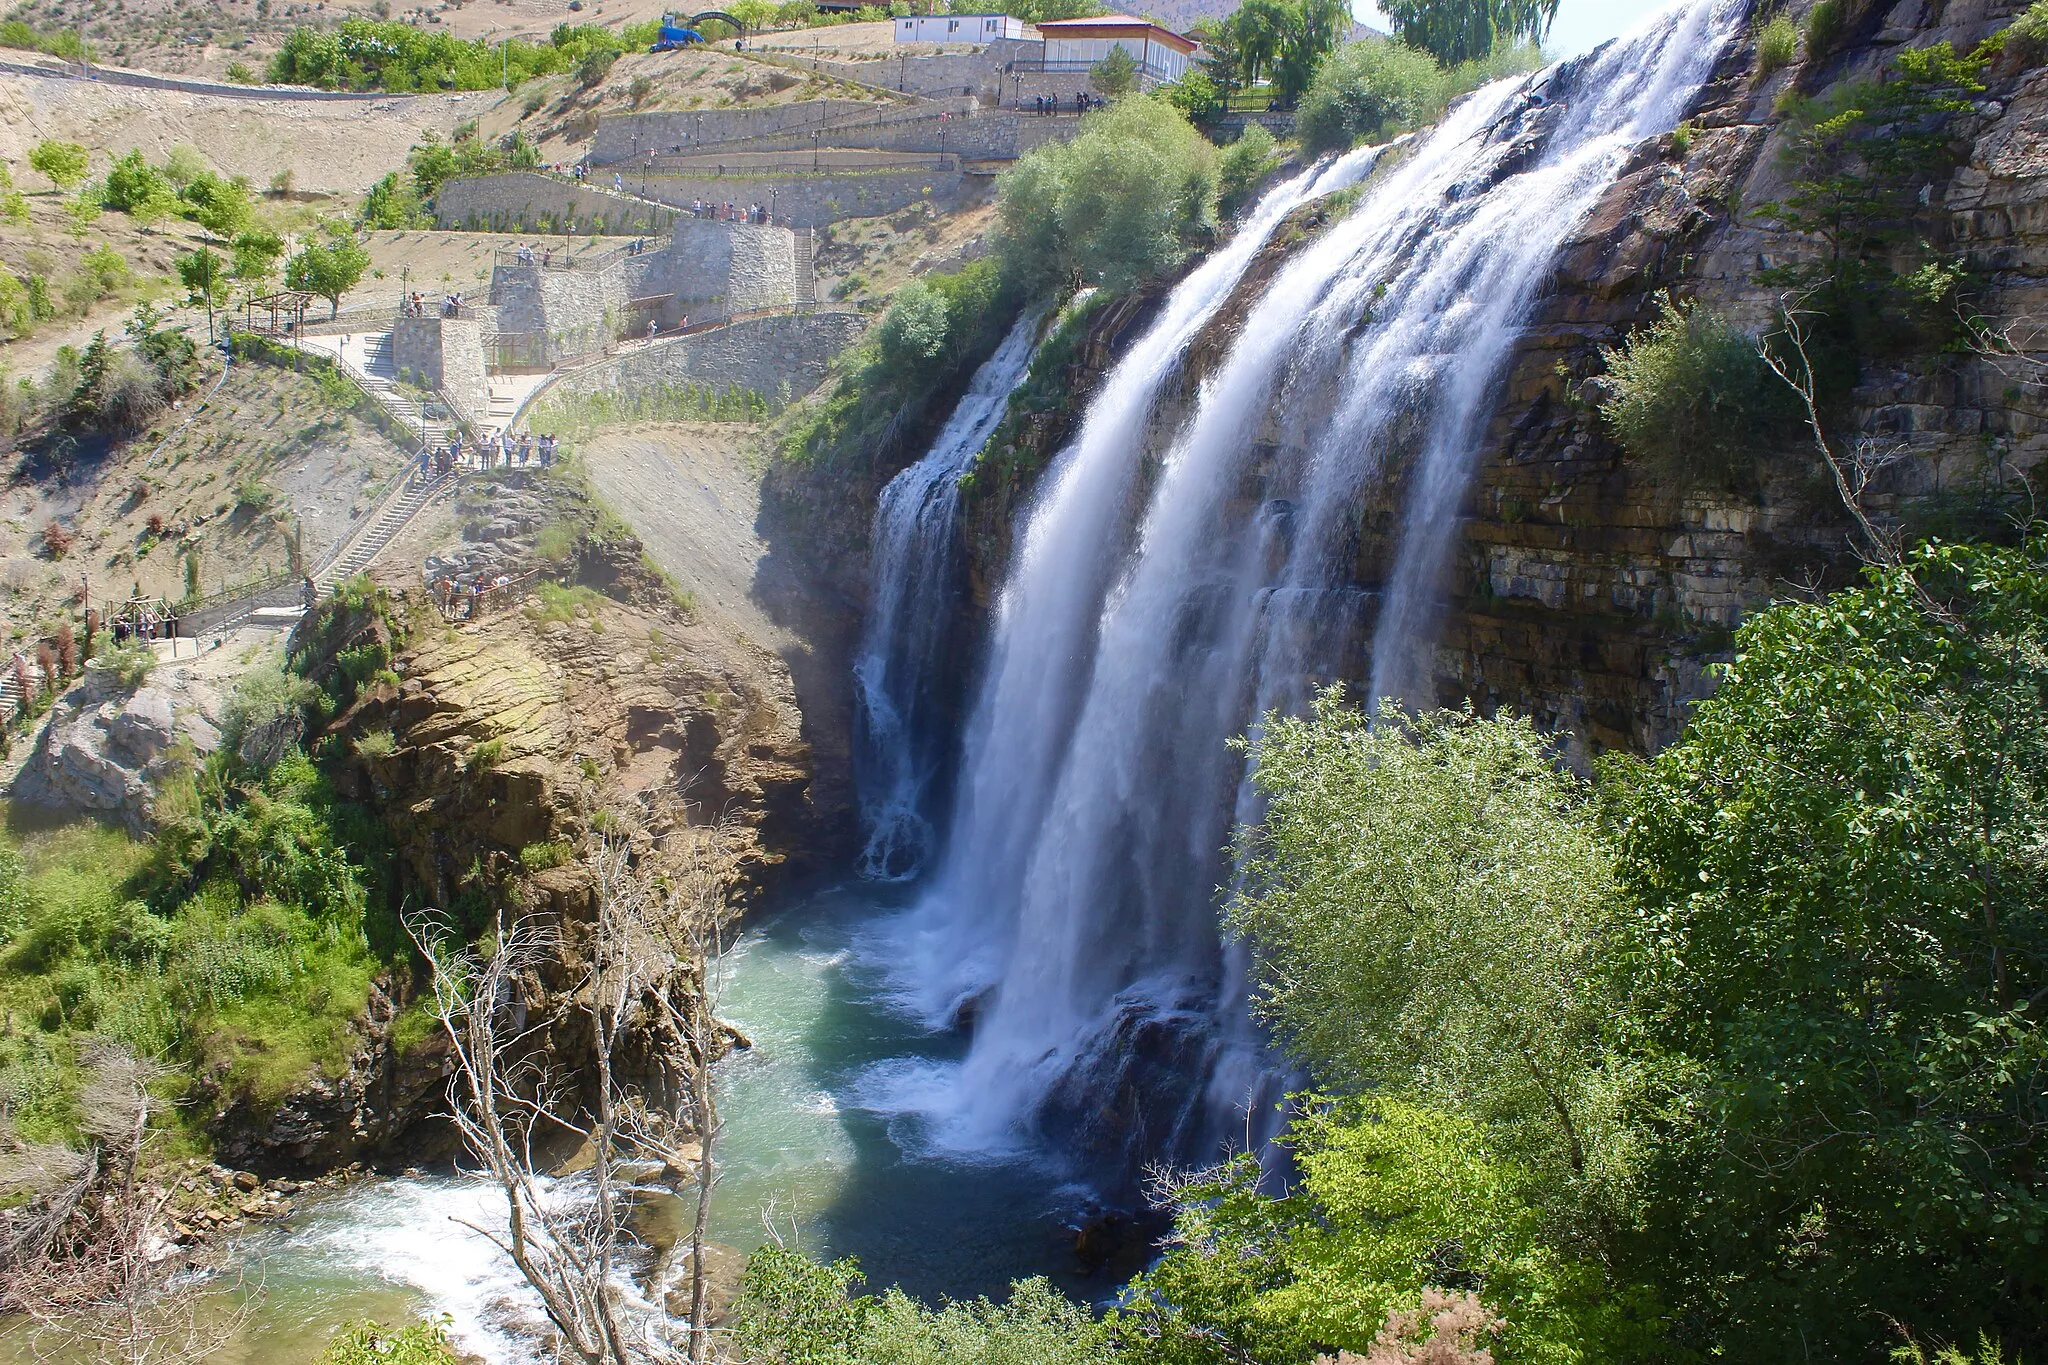 Photo showing: One of the biggest waterfalls in Turkey, Tortum Waterfall is connected to Lake Tortum and it is a famous landmark among tourists and visitors. The picture, which is taken at the end of June, shows the waterfall in a period when it has a great flow.